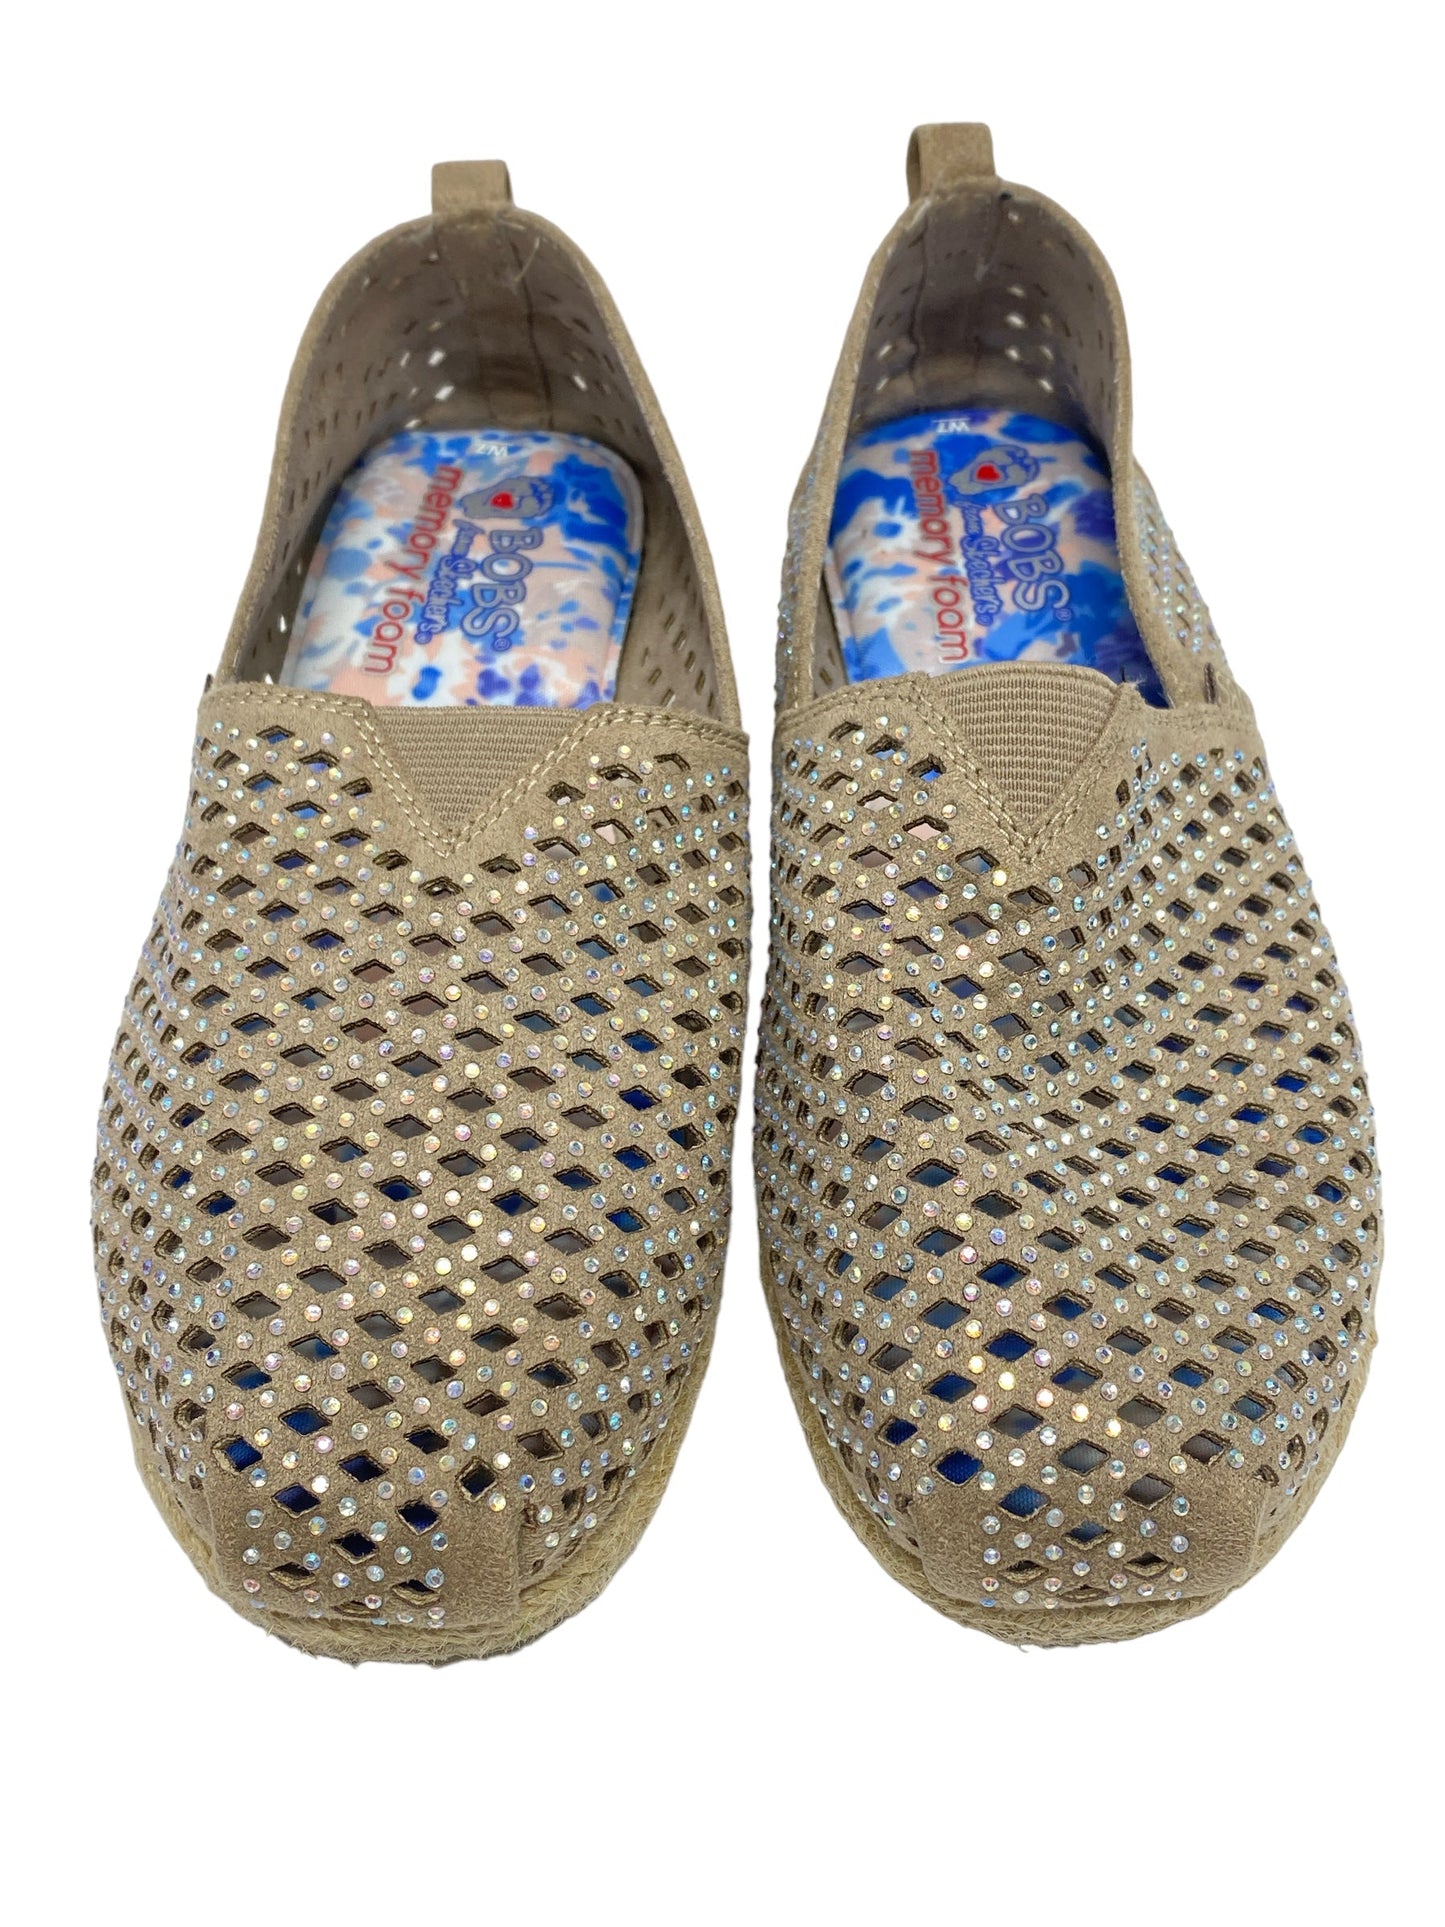 Shoes Flats Espadrille By Bobs  Size: 7